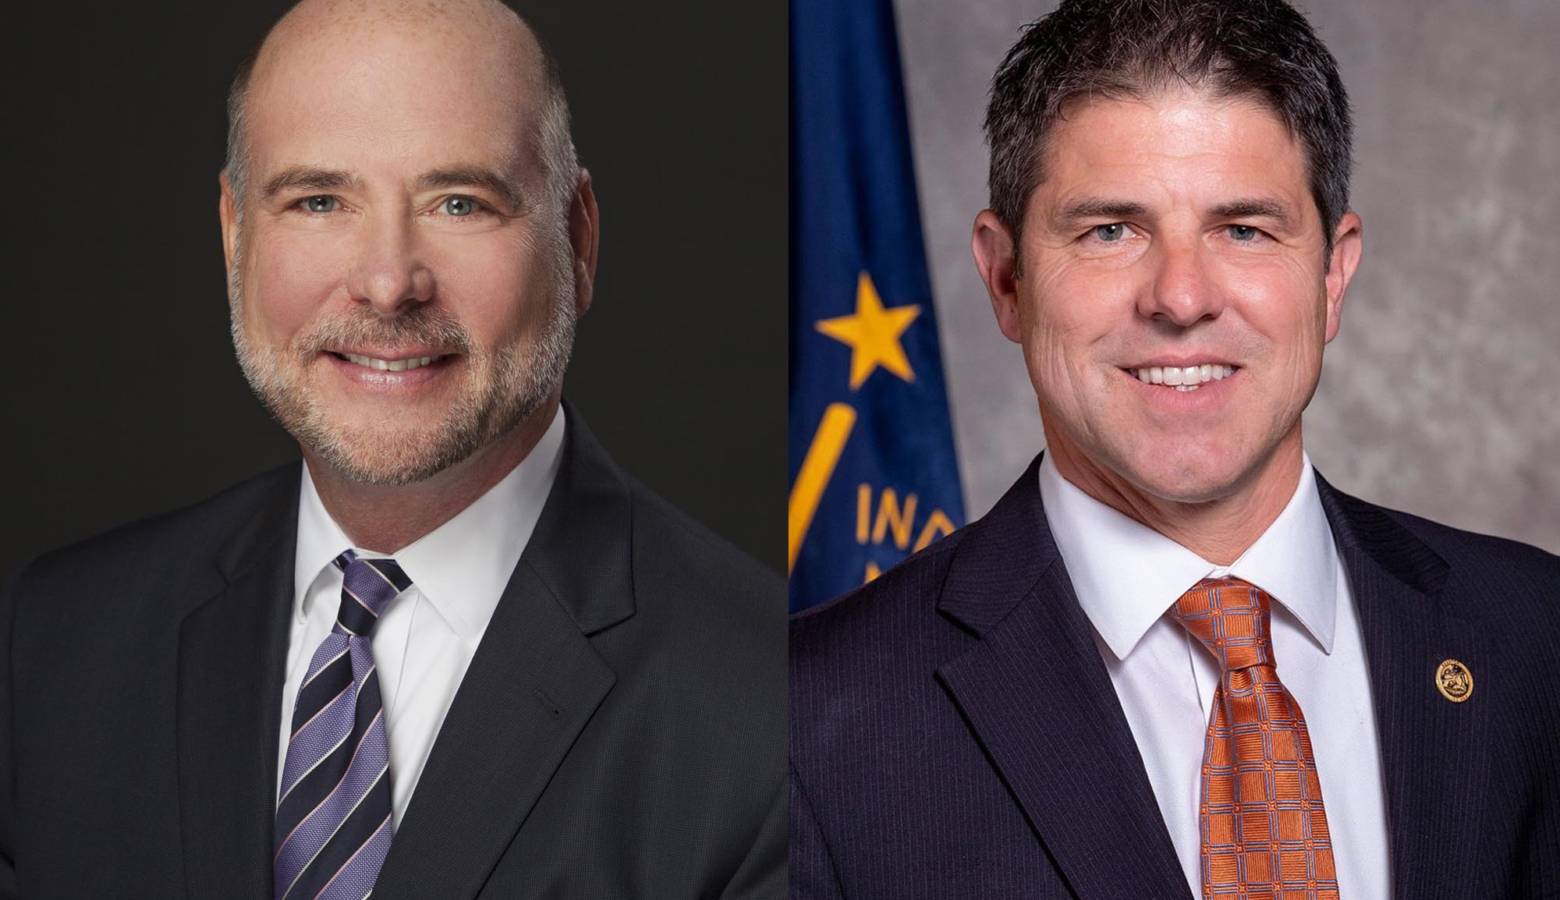 House Speaker Brian Bosma (R-Indianapolis) and Senate President Pro Tem Rodric Bray (R-Martinsville). (Indiana General Assembly)